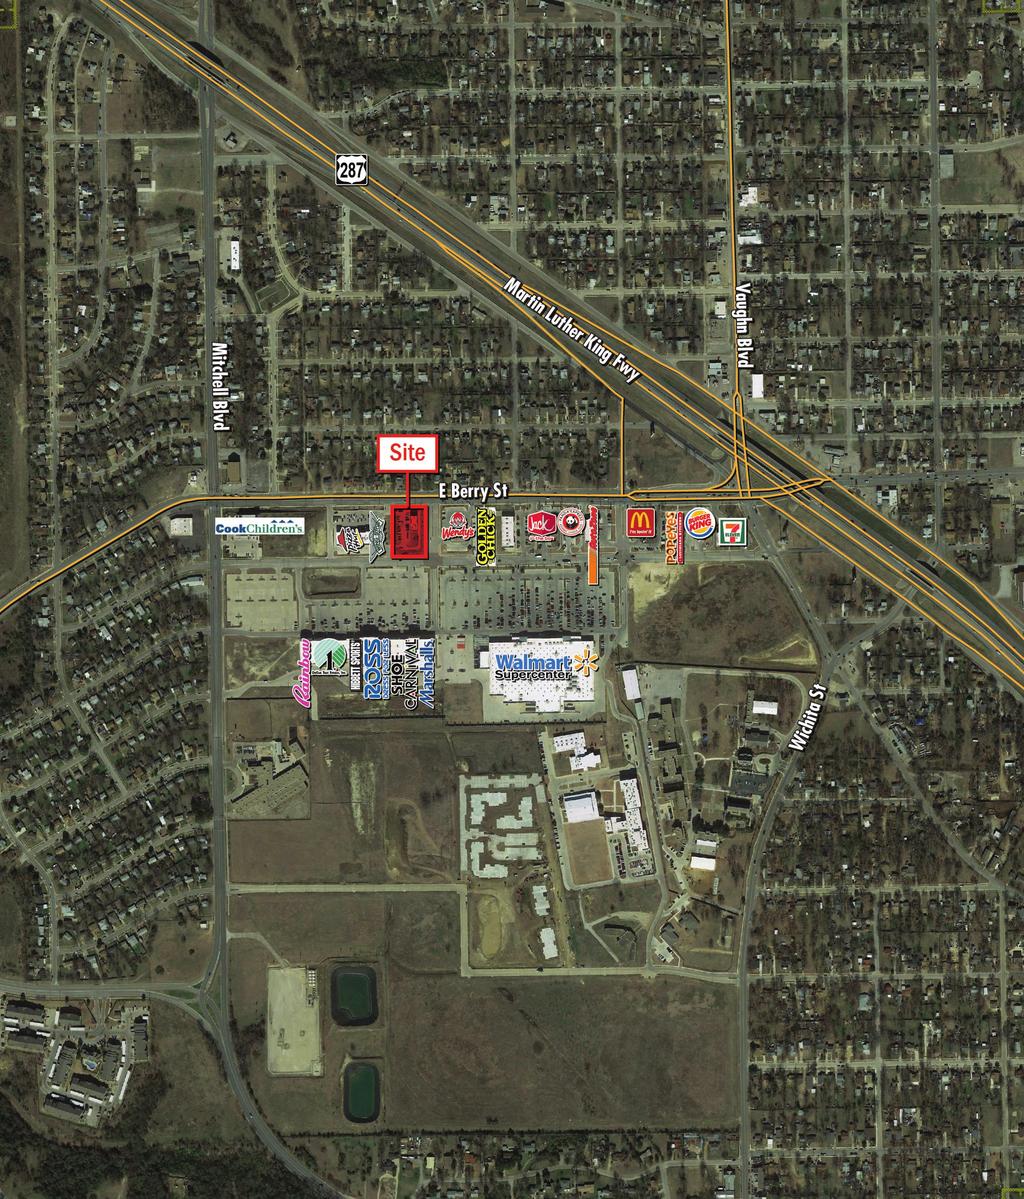 HIGHWAY 287 AND BERRY FOR MORE INFO, PLEASE CONTACT: 2016 2017 The Retail Retail Connection, Connection, L.P. L.P. All AllRights RightsReserved. Reserved.